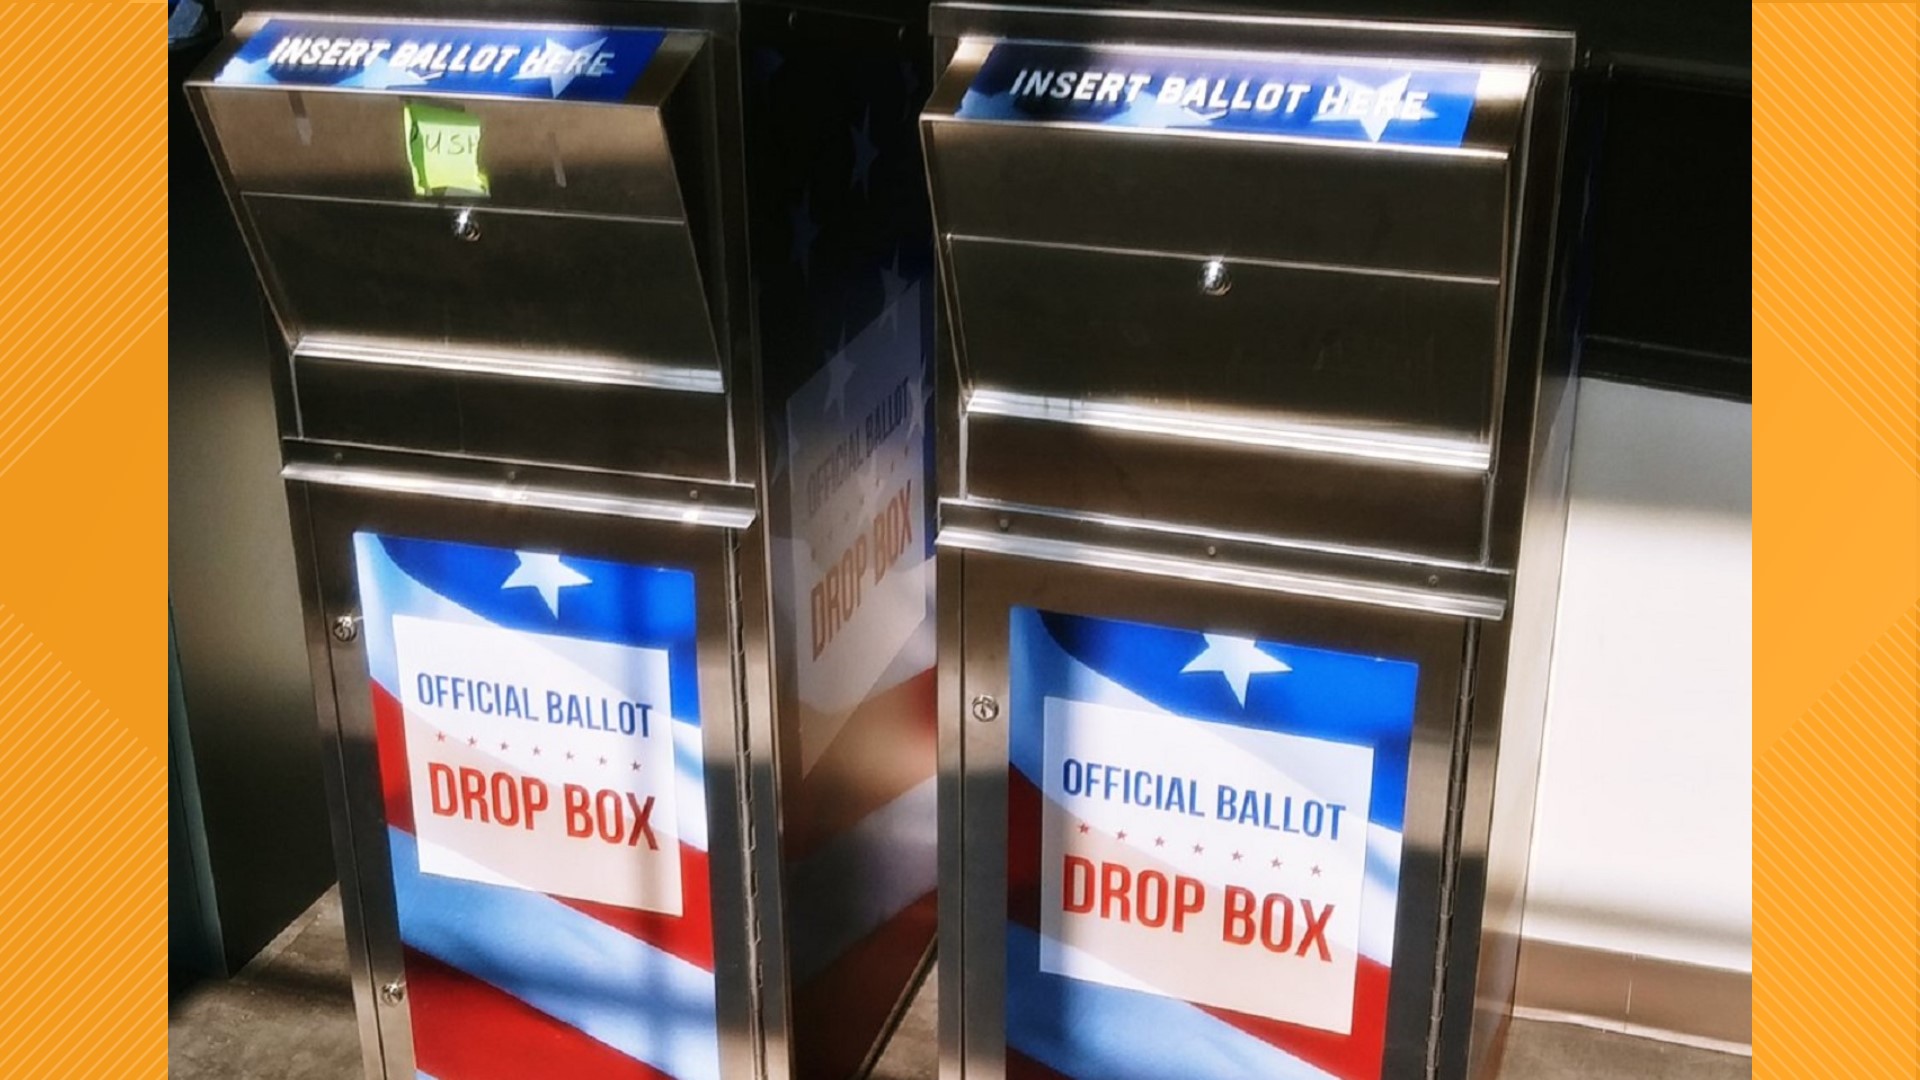 The VERIFY team takes a skeptical viewer through the drop box ballot collection process to separate rumor from reality and show how votes get counted.